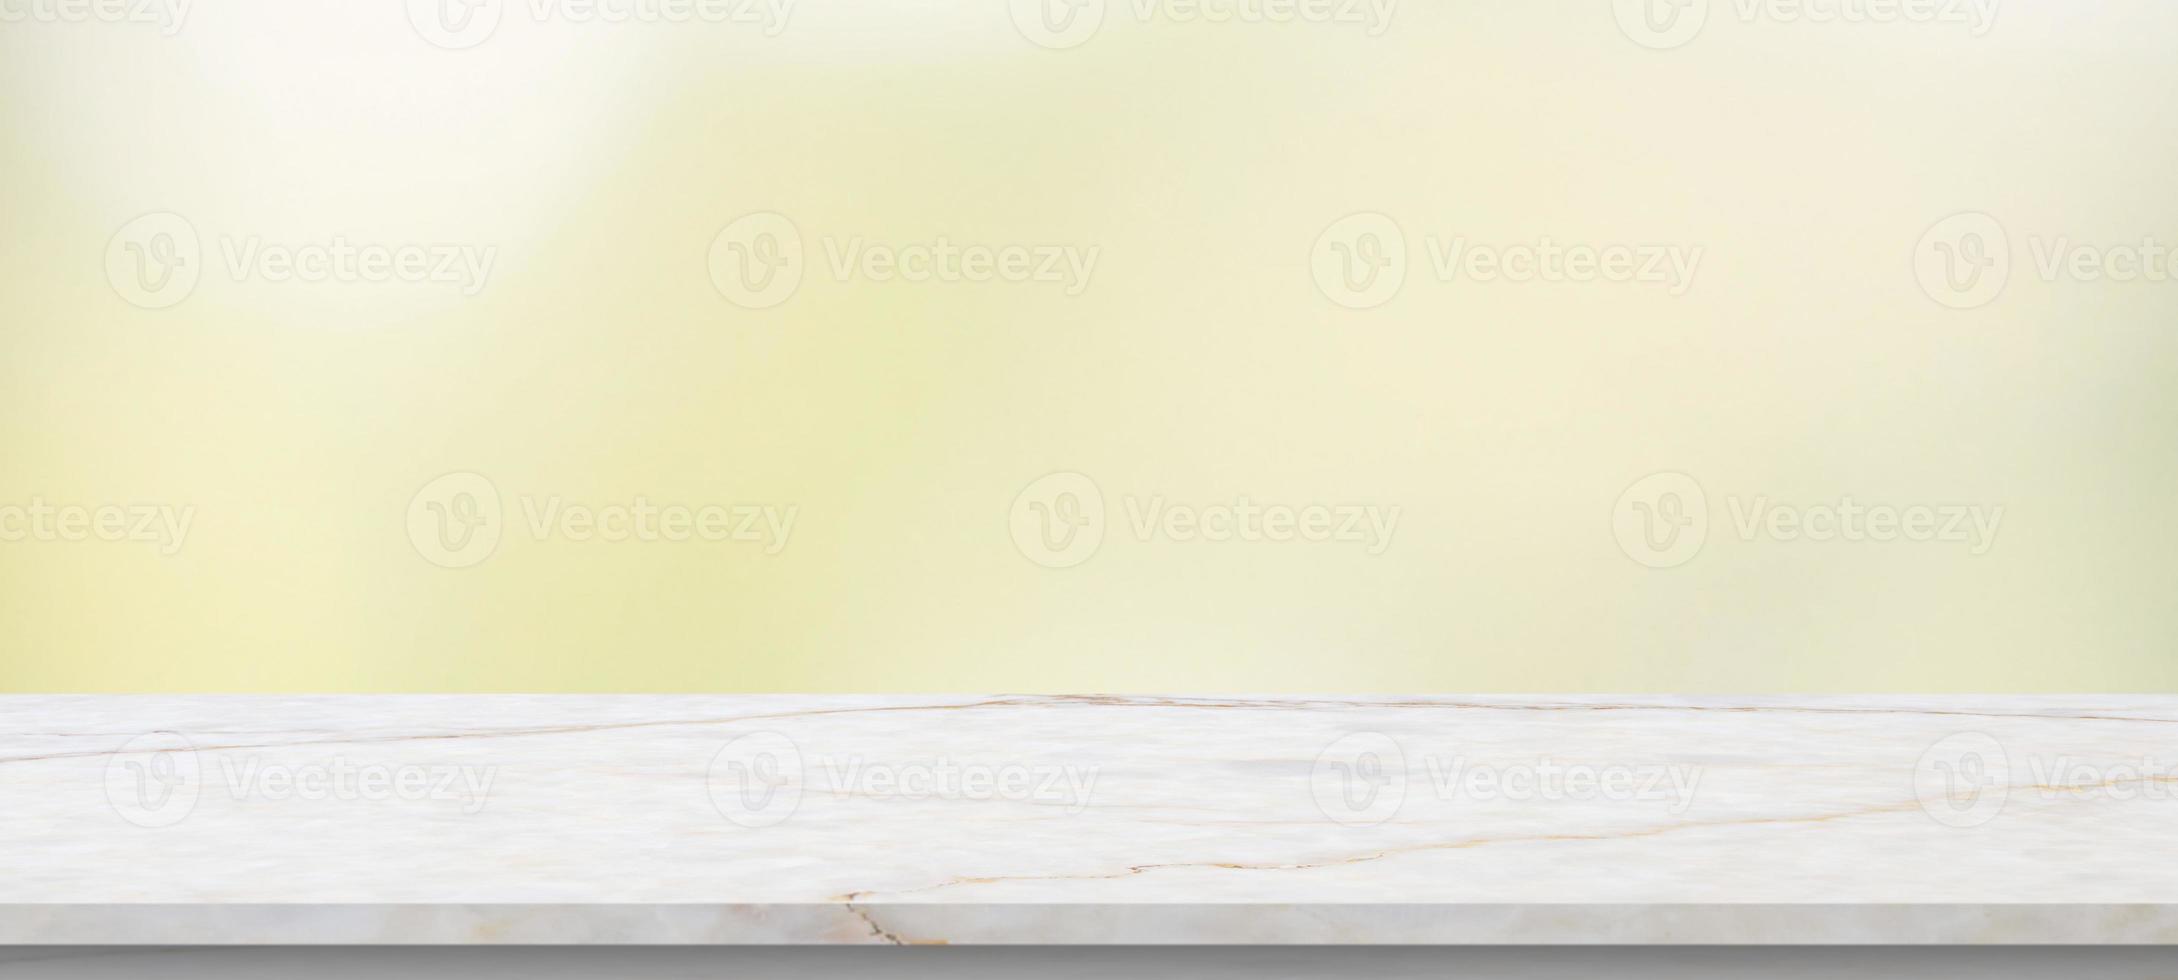 marble table top with blurred kitchen cafe restaurant interior background photo